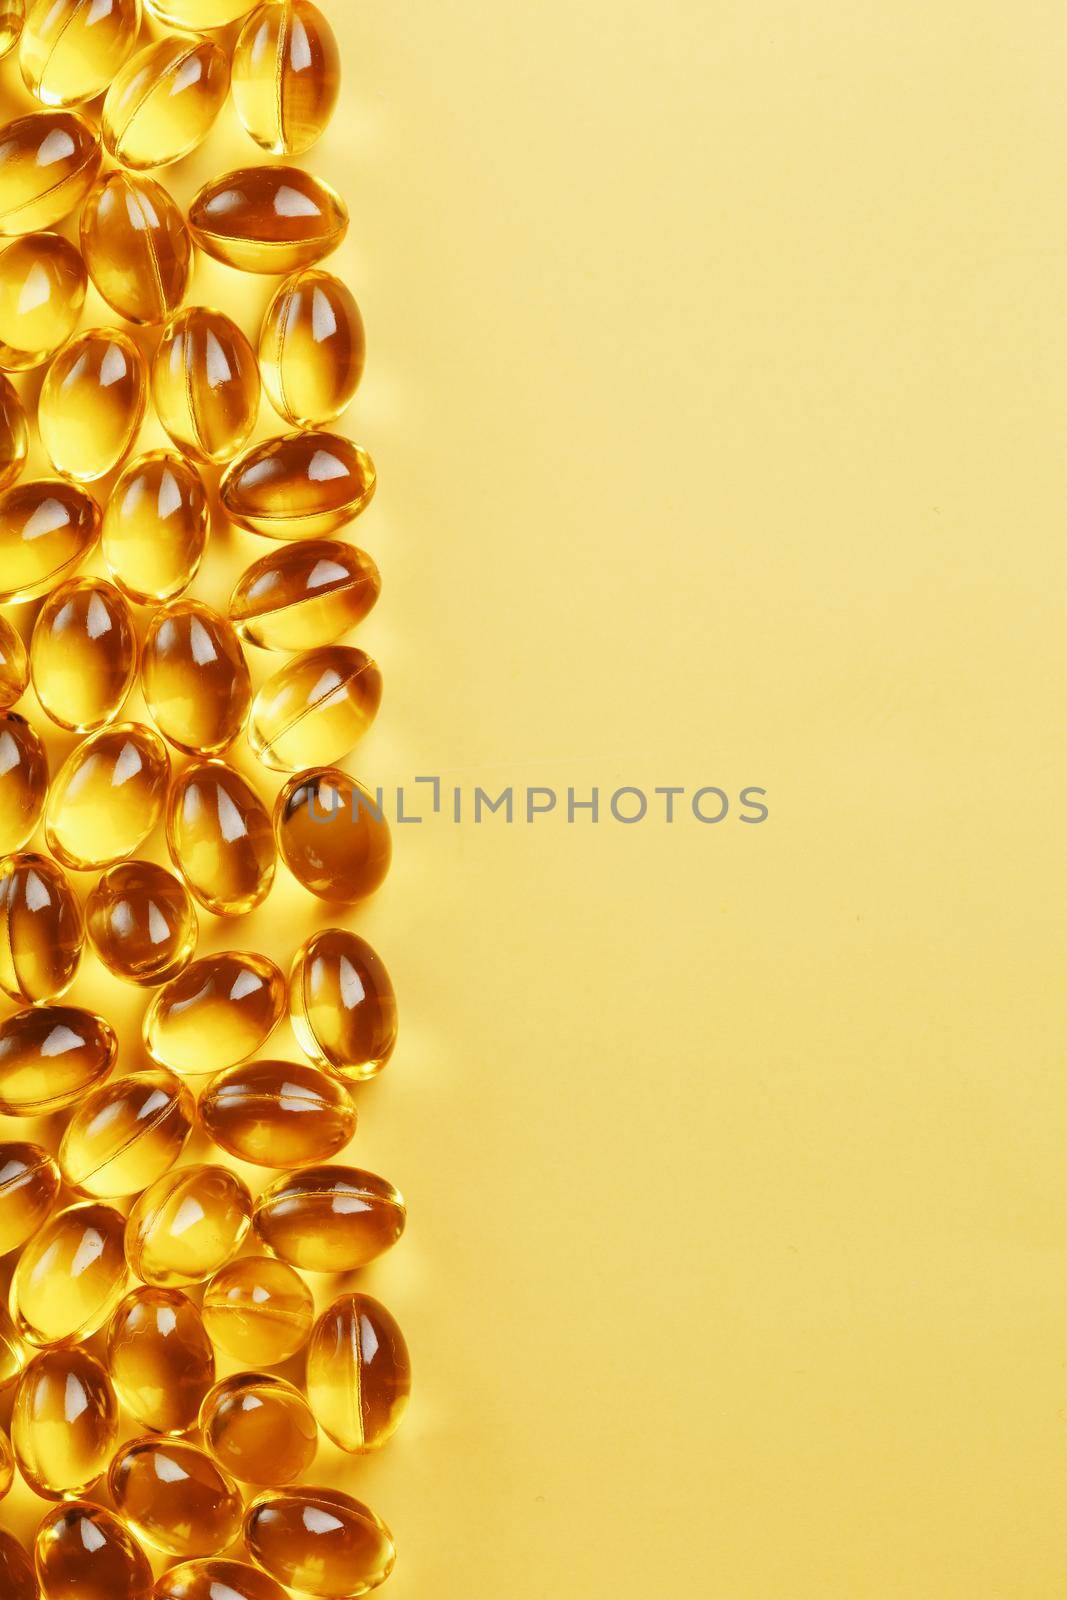 Capsules in a shell with Omega-3 fish oil on a yellow background and a place for text by AlexGrec